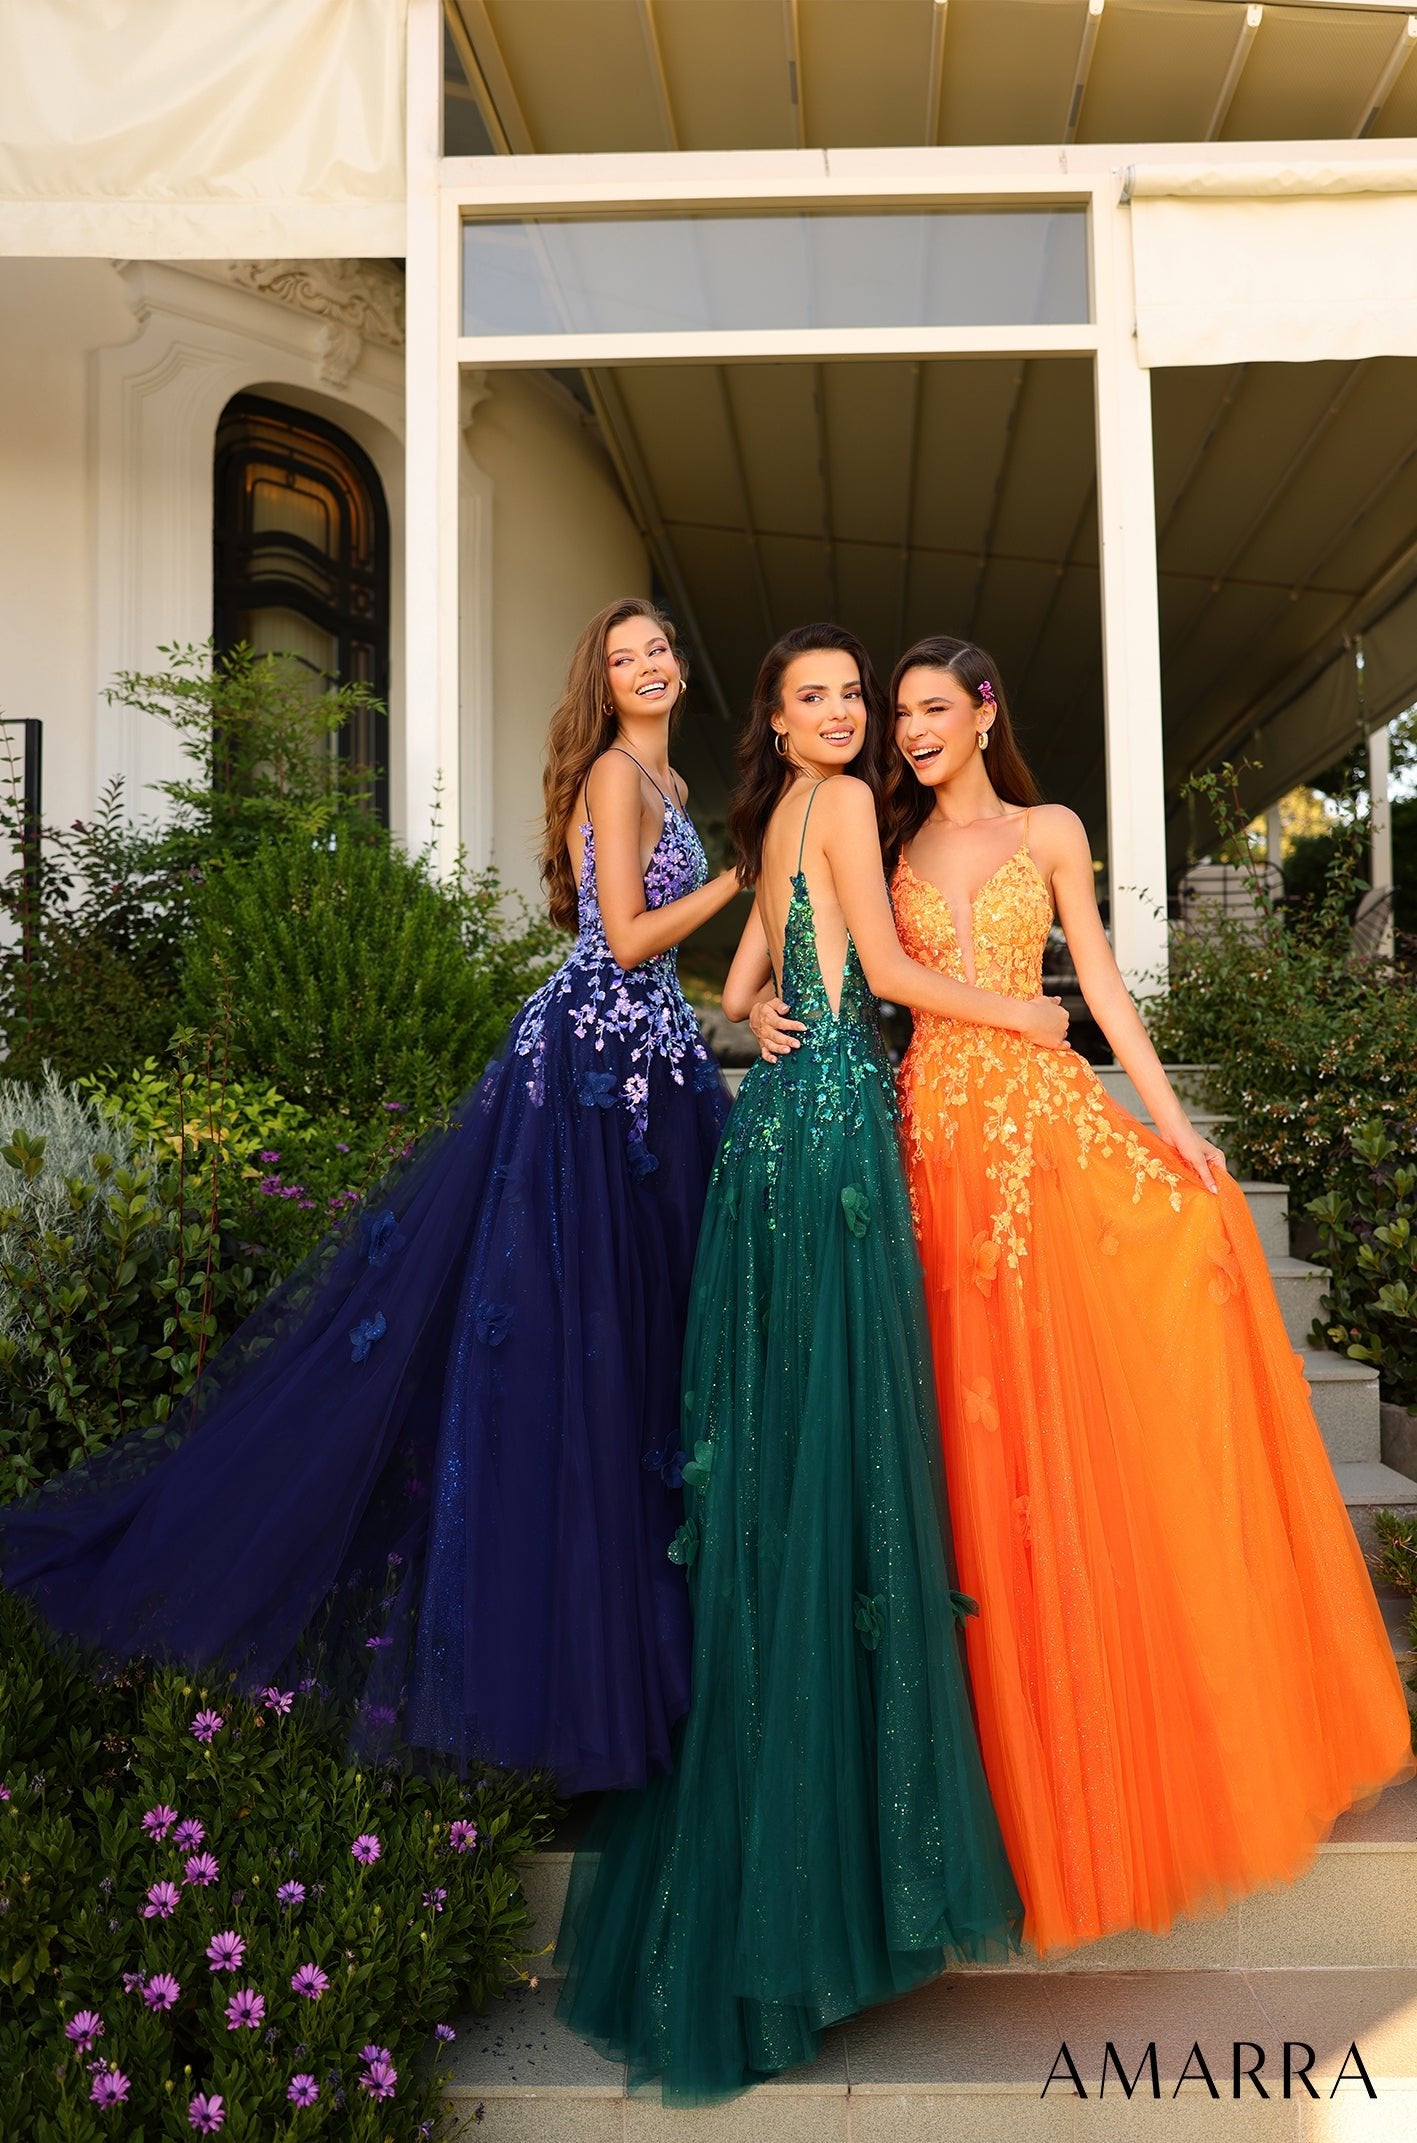 Beautiful Royal Blue Ruffles Cheap Prom Dress Beaded With Tulle Sleeves -  $130.9824 #AM79021 - SheProm.com